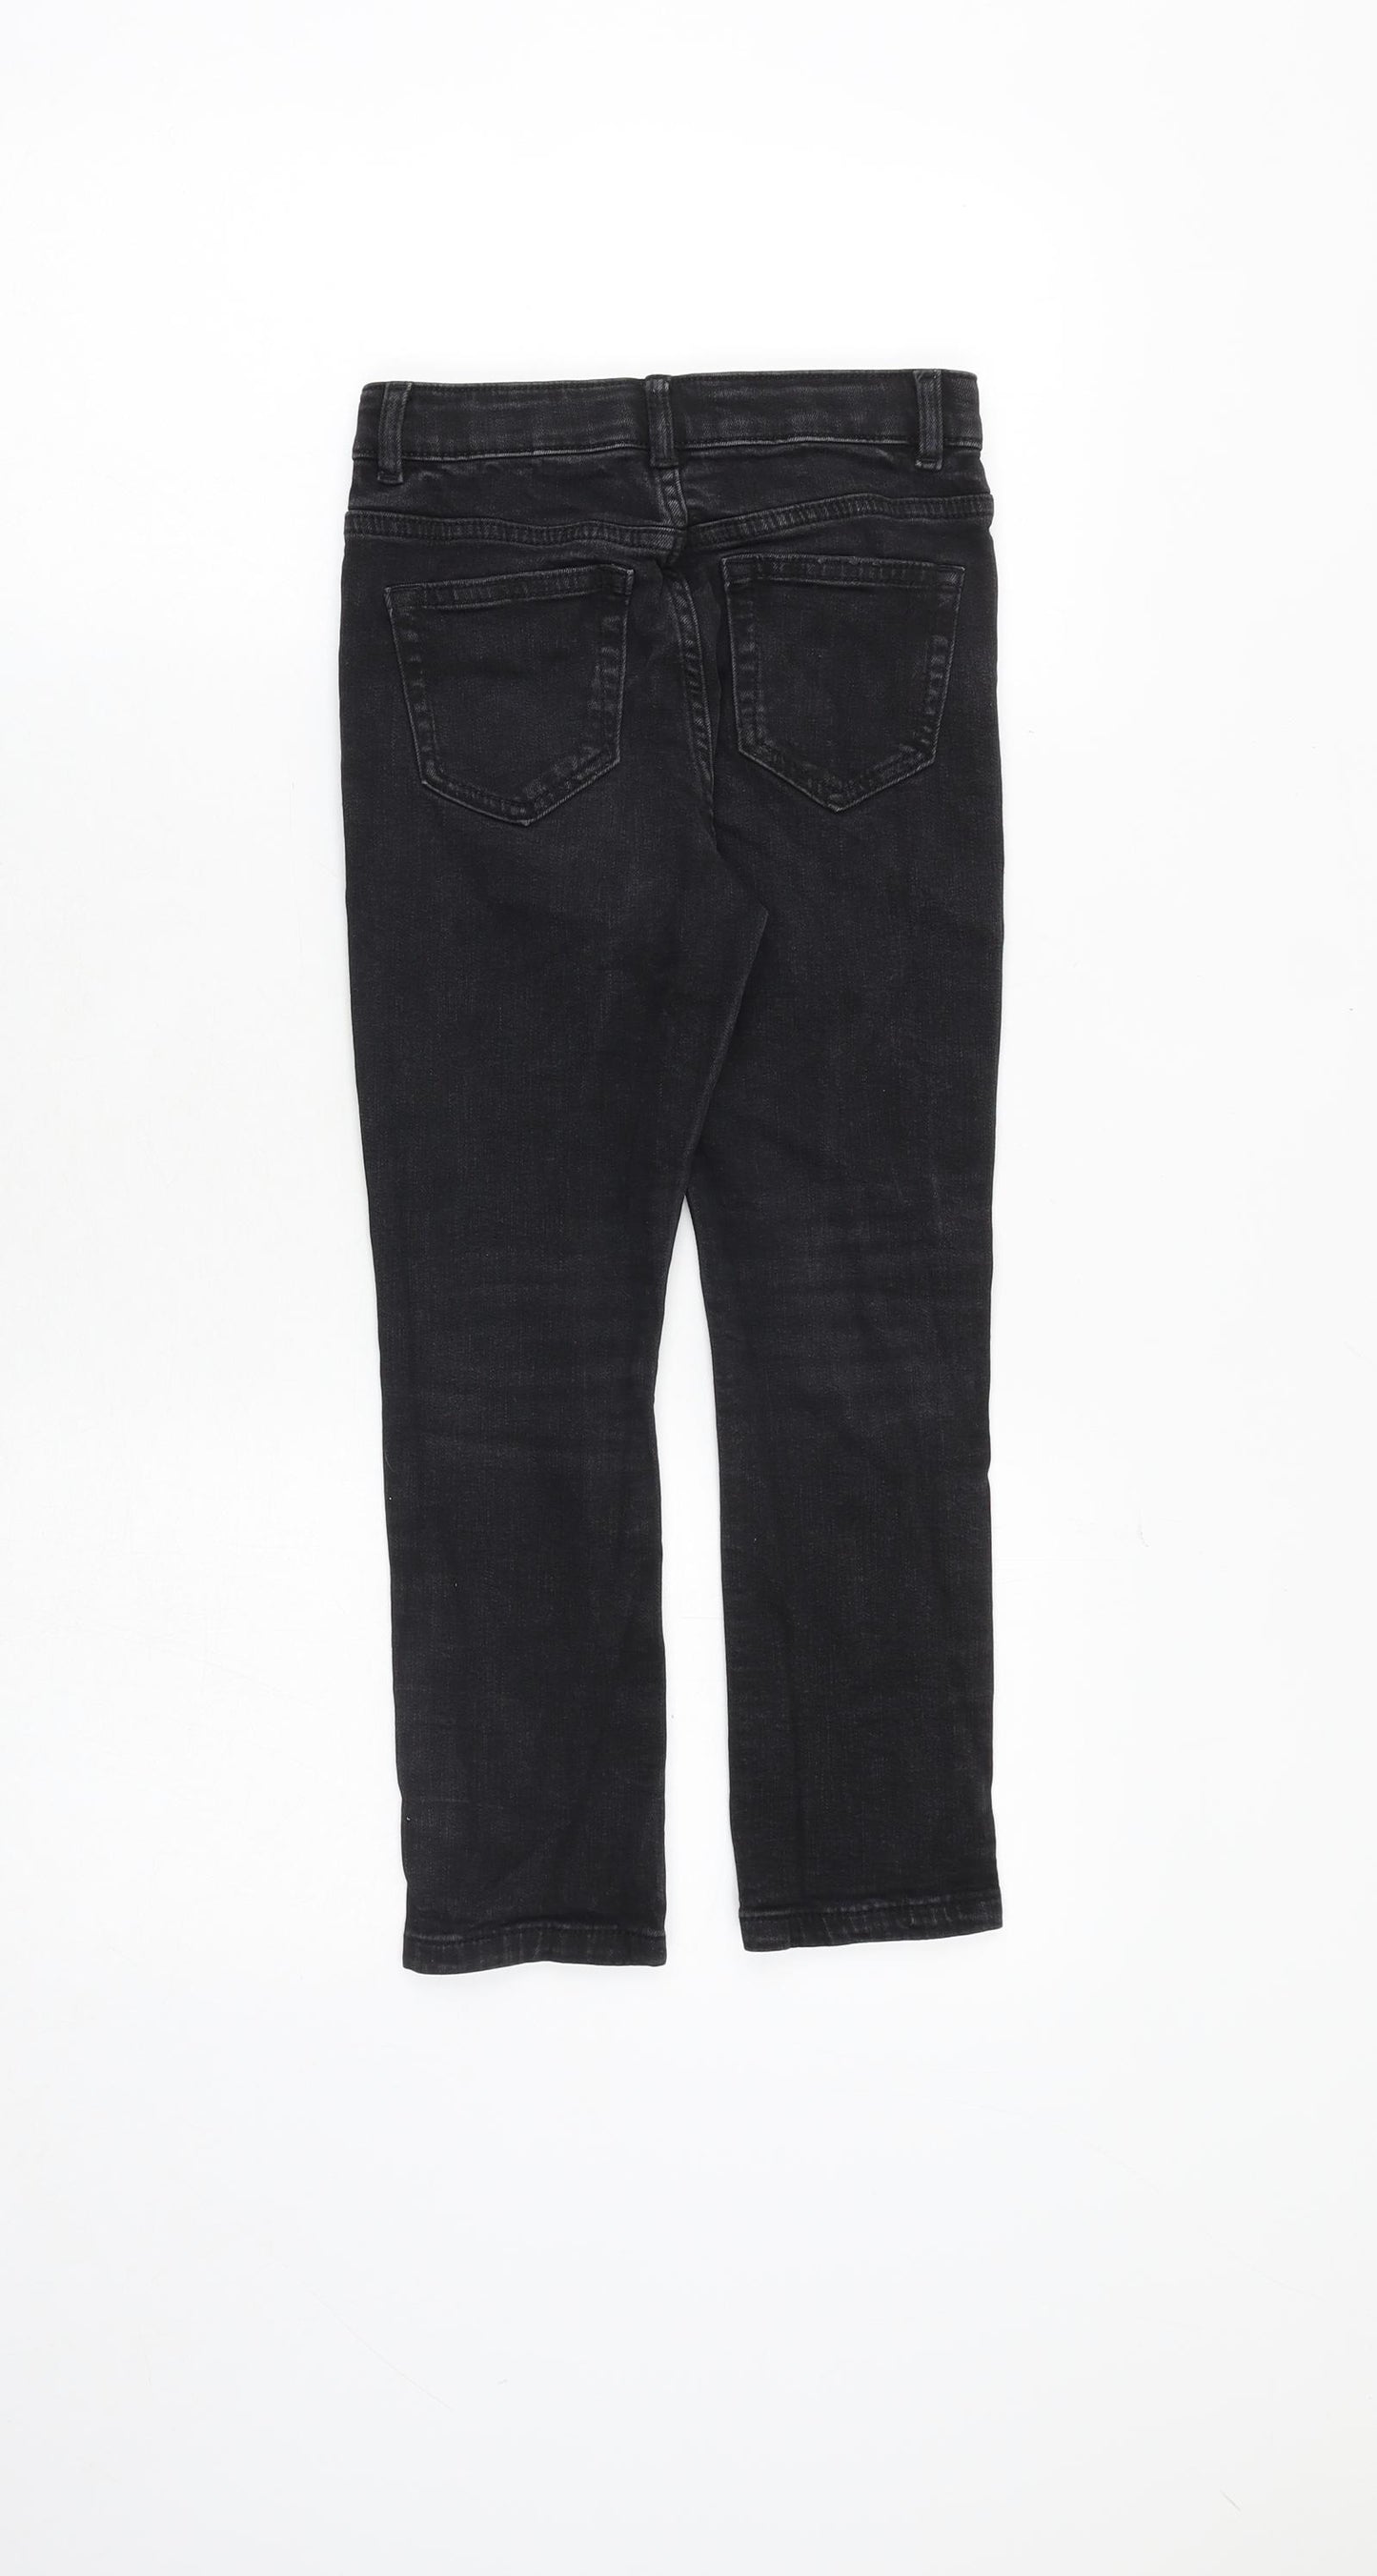 Marks and Spencer Boys Black Cotton Skinny Jeans Size 7-8 Years Regular Zip